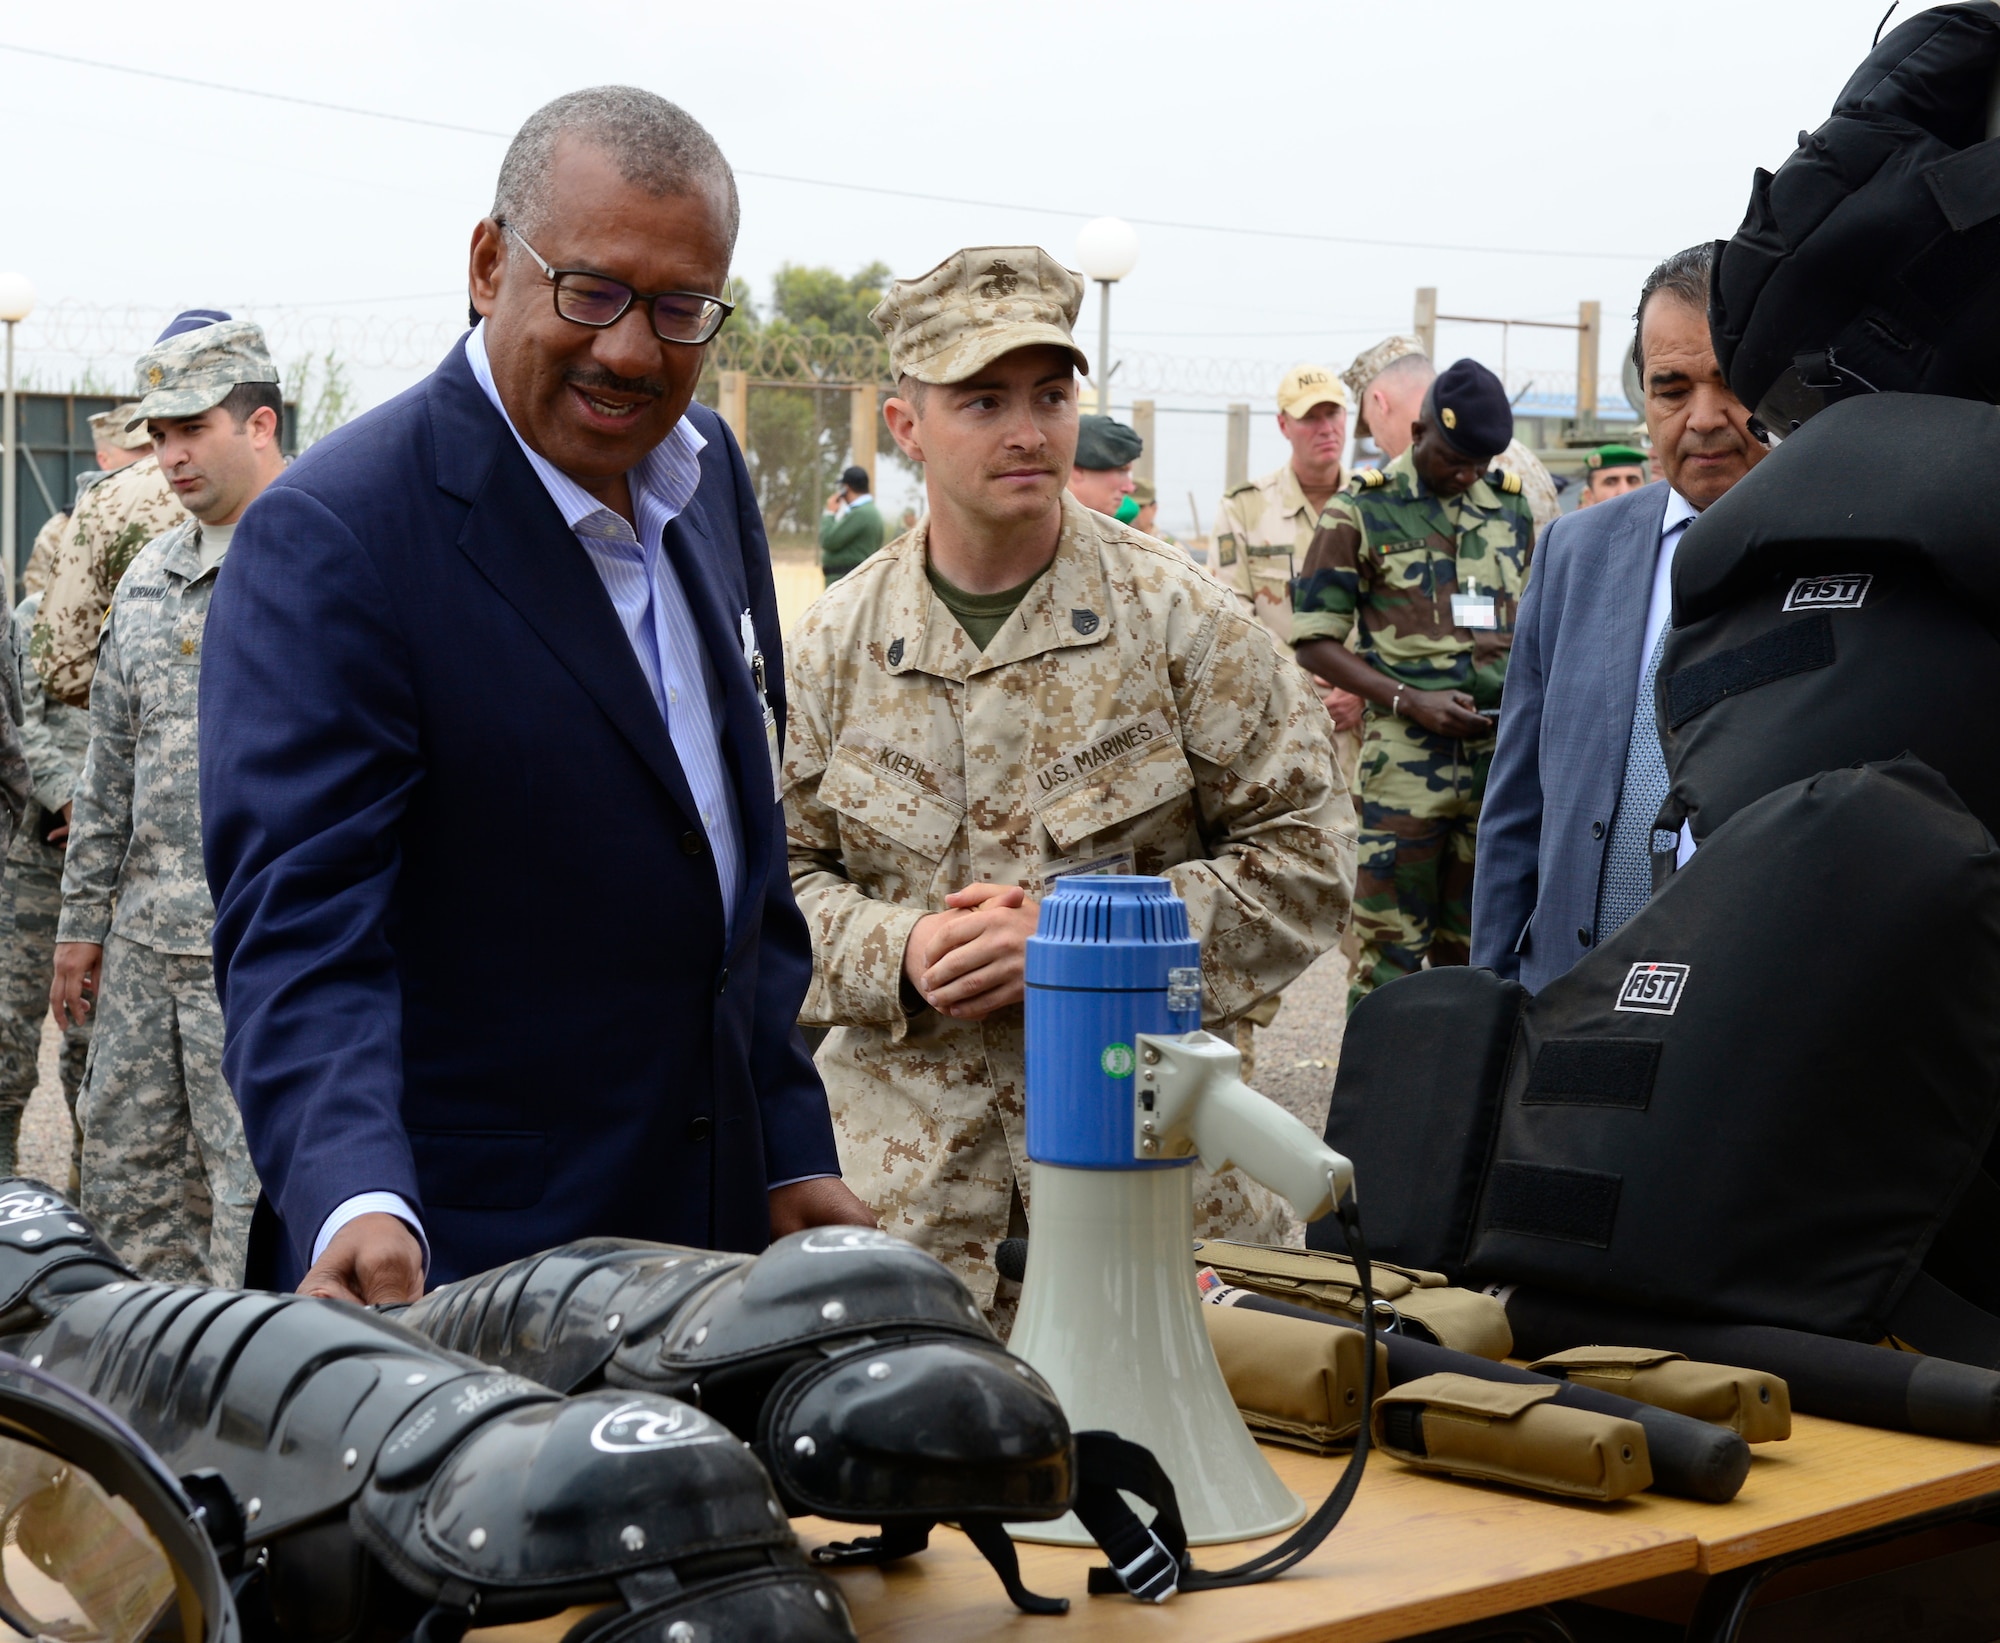 Ambassador Dwight Bush, U.S. Ambassador to Morocco, examines equipment used by different nations during peace support operations as part of AFRICAN LION 16 at Tifnit, Kingdom of Morocco, April 26, 2016. The U.S. Marine Forces Europe-Africa and Kingdom of Morocco-led combined, joint exercise brought together 11 different countries to participate in a Combined Joint Task Force command post exercise and a peace support operations field training exercise to improve interoperability between countries. (U.S. Air Force photo illustration by Senior Airman Krystal Ardrey/Released)